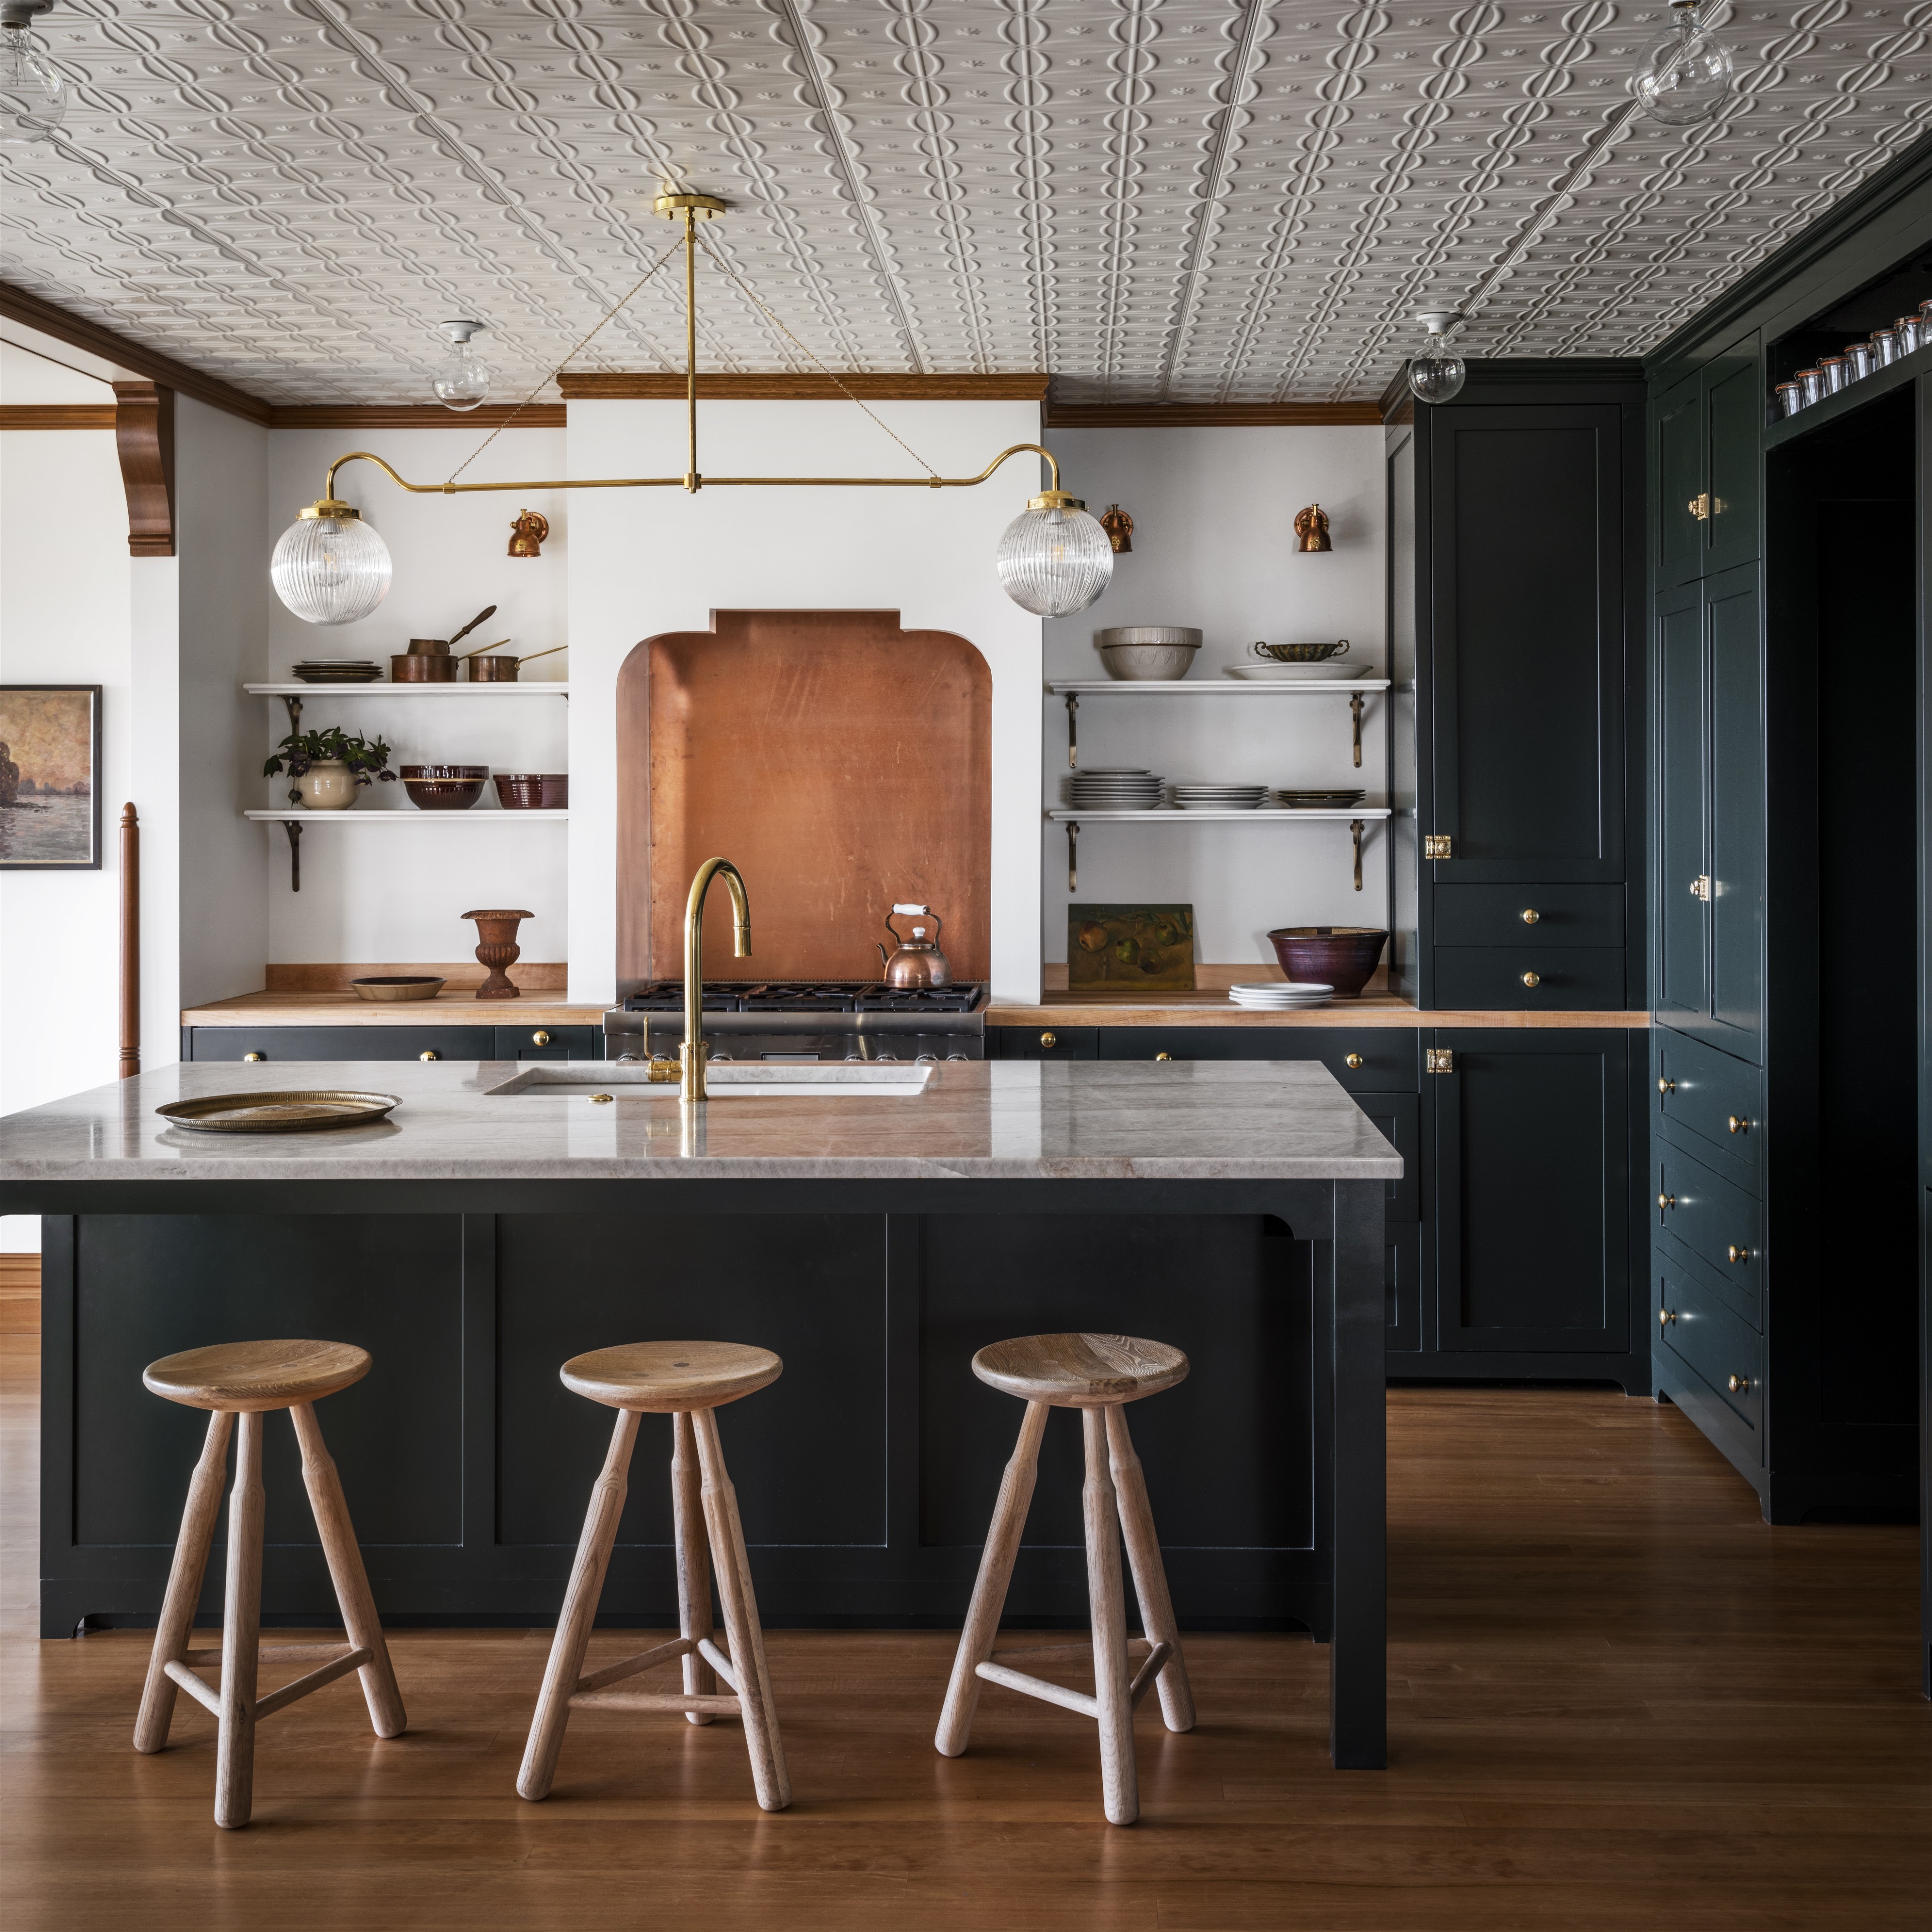 The preview image of an This Victorian Kitchen Renovation Keeps All the Good Period Details article